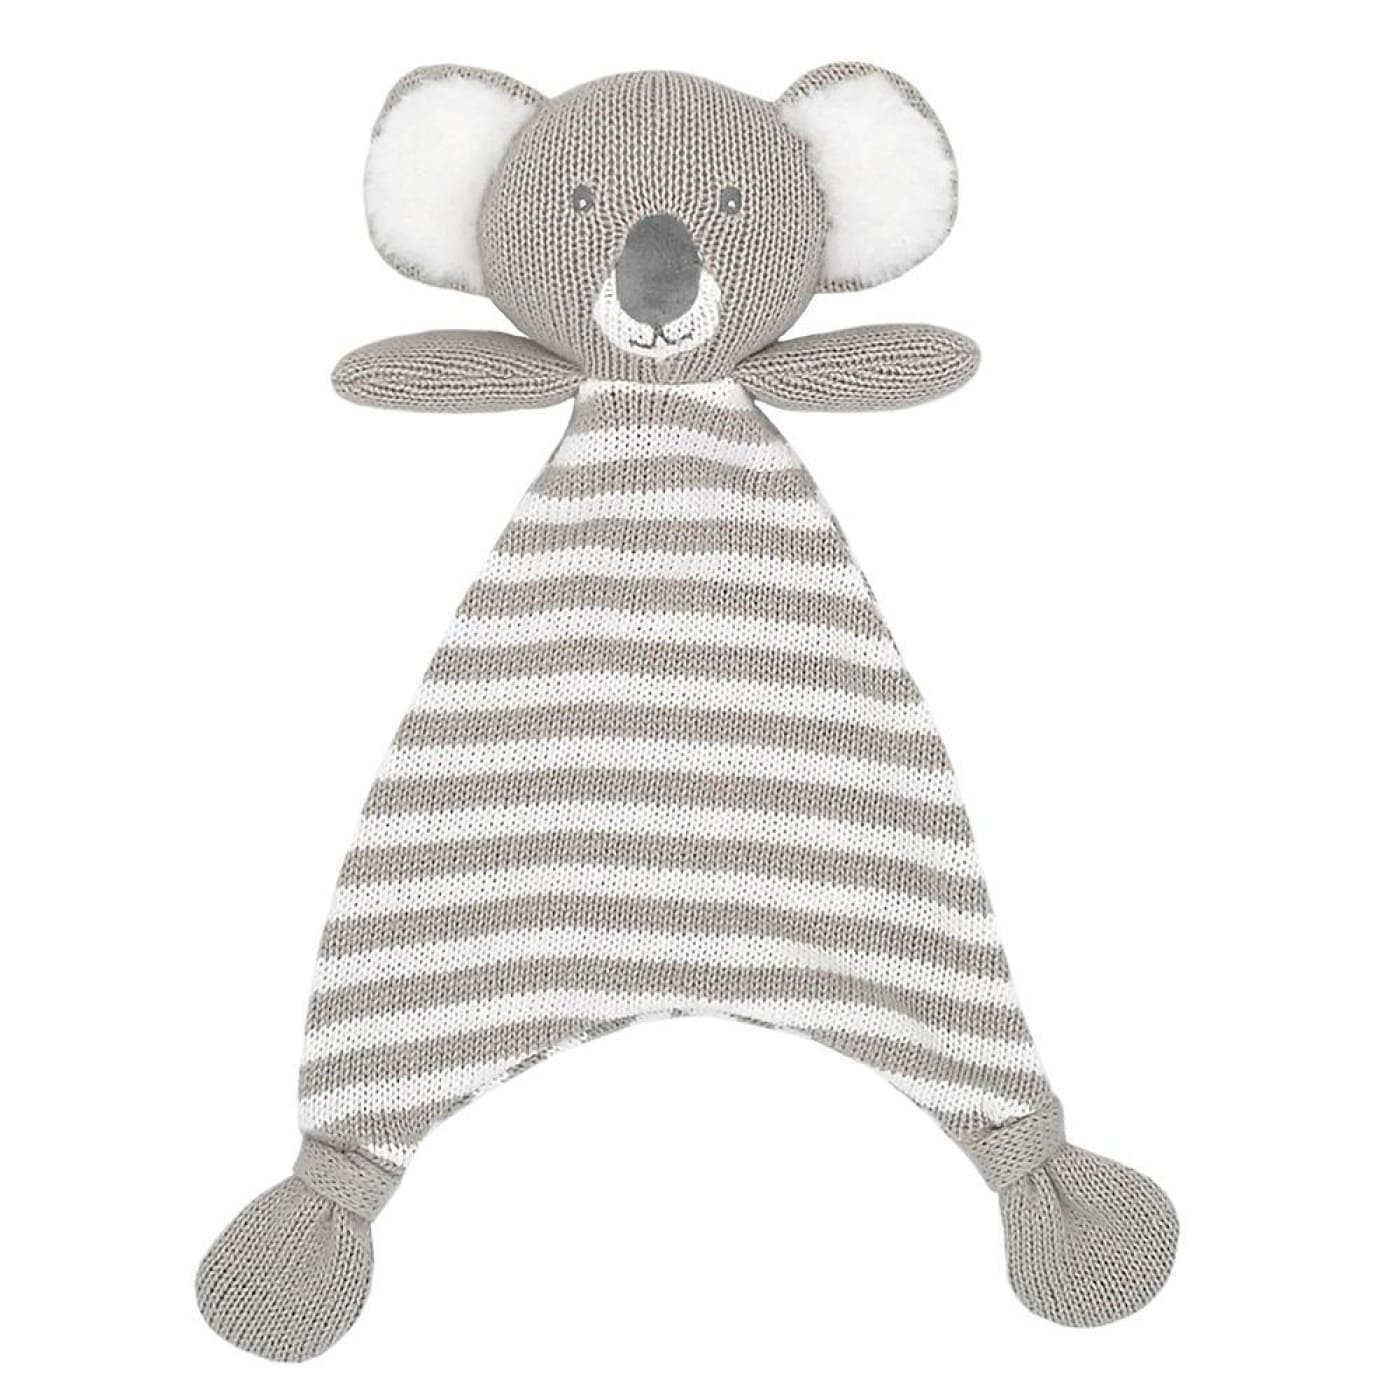 Living Textiles Knit Security Blanket - Kevin The Koala - TOYS & PLAY - BLANKIES/COMFORTERS/RATTLES